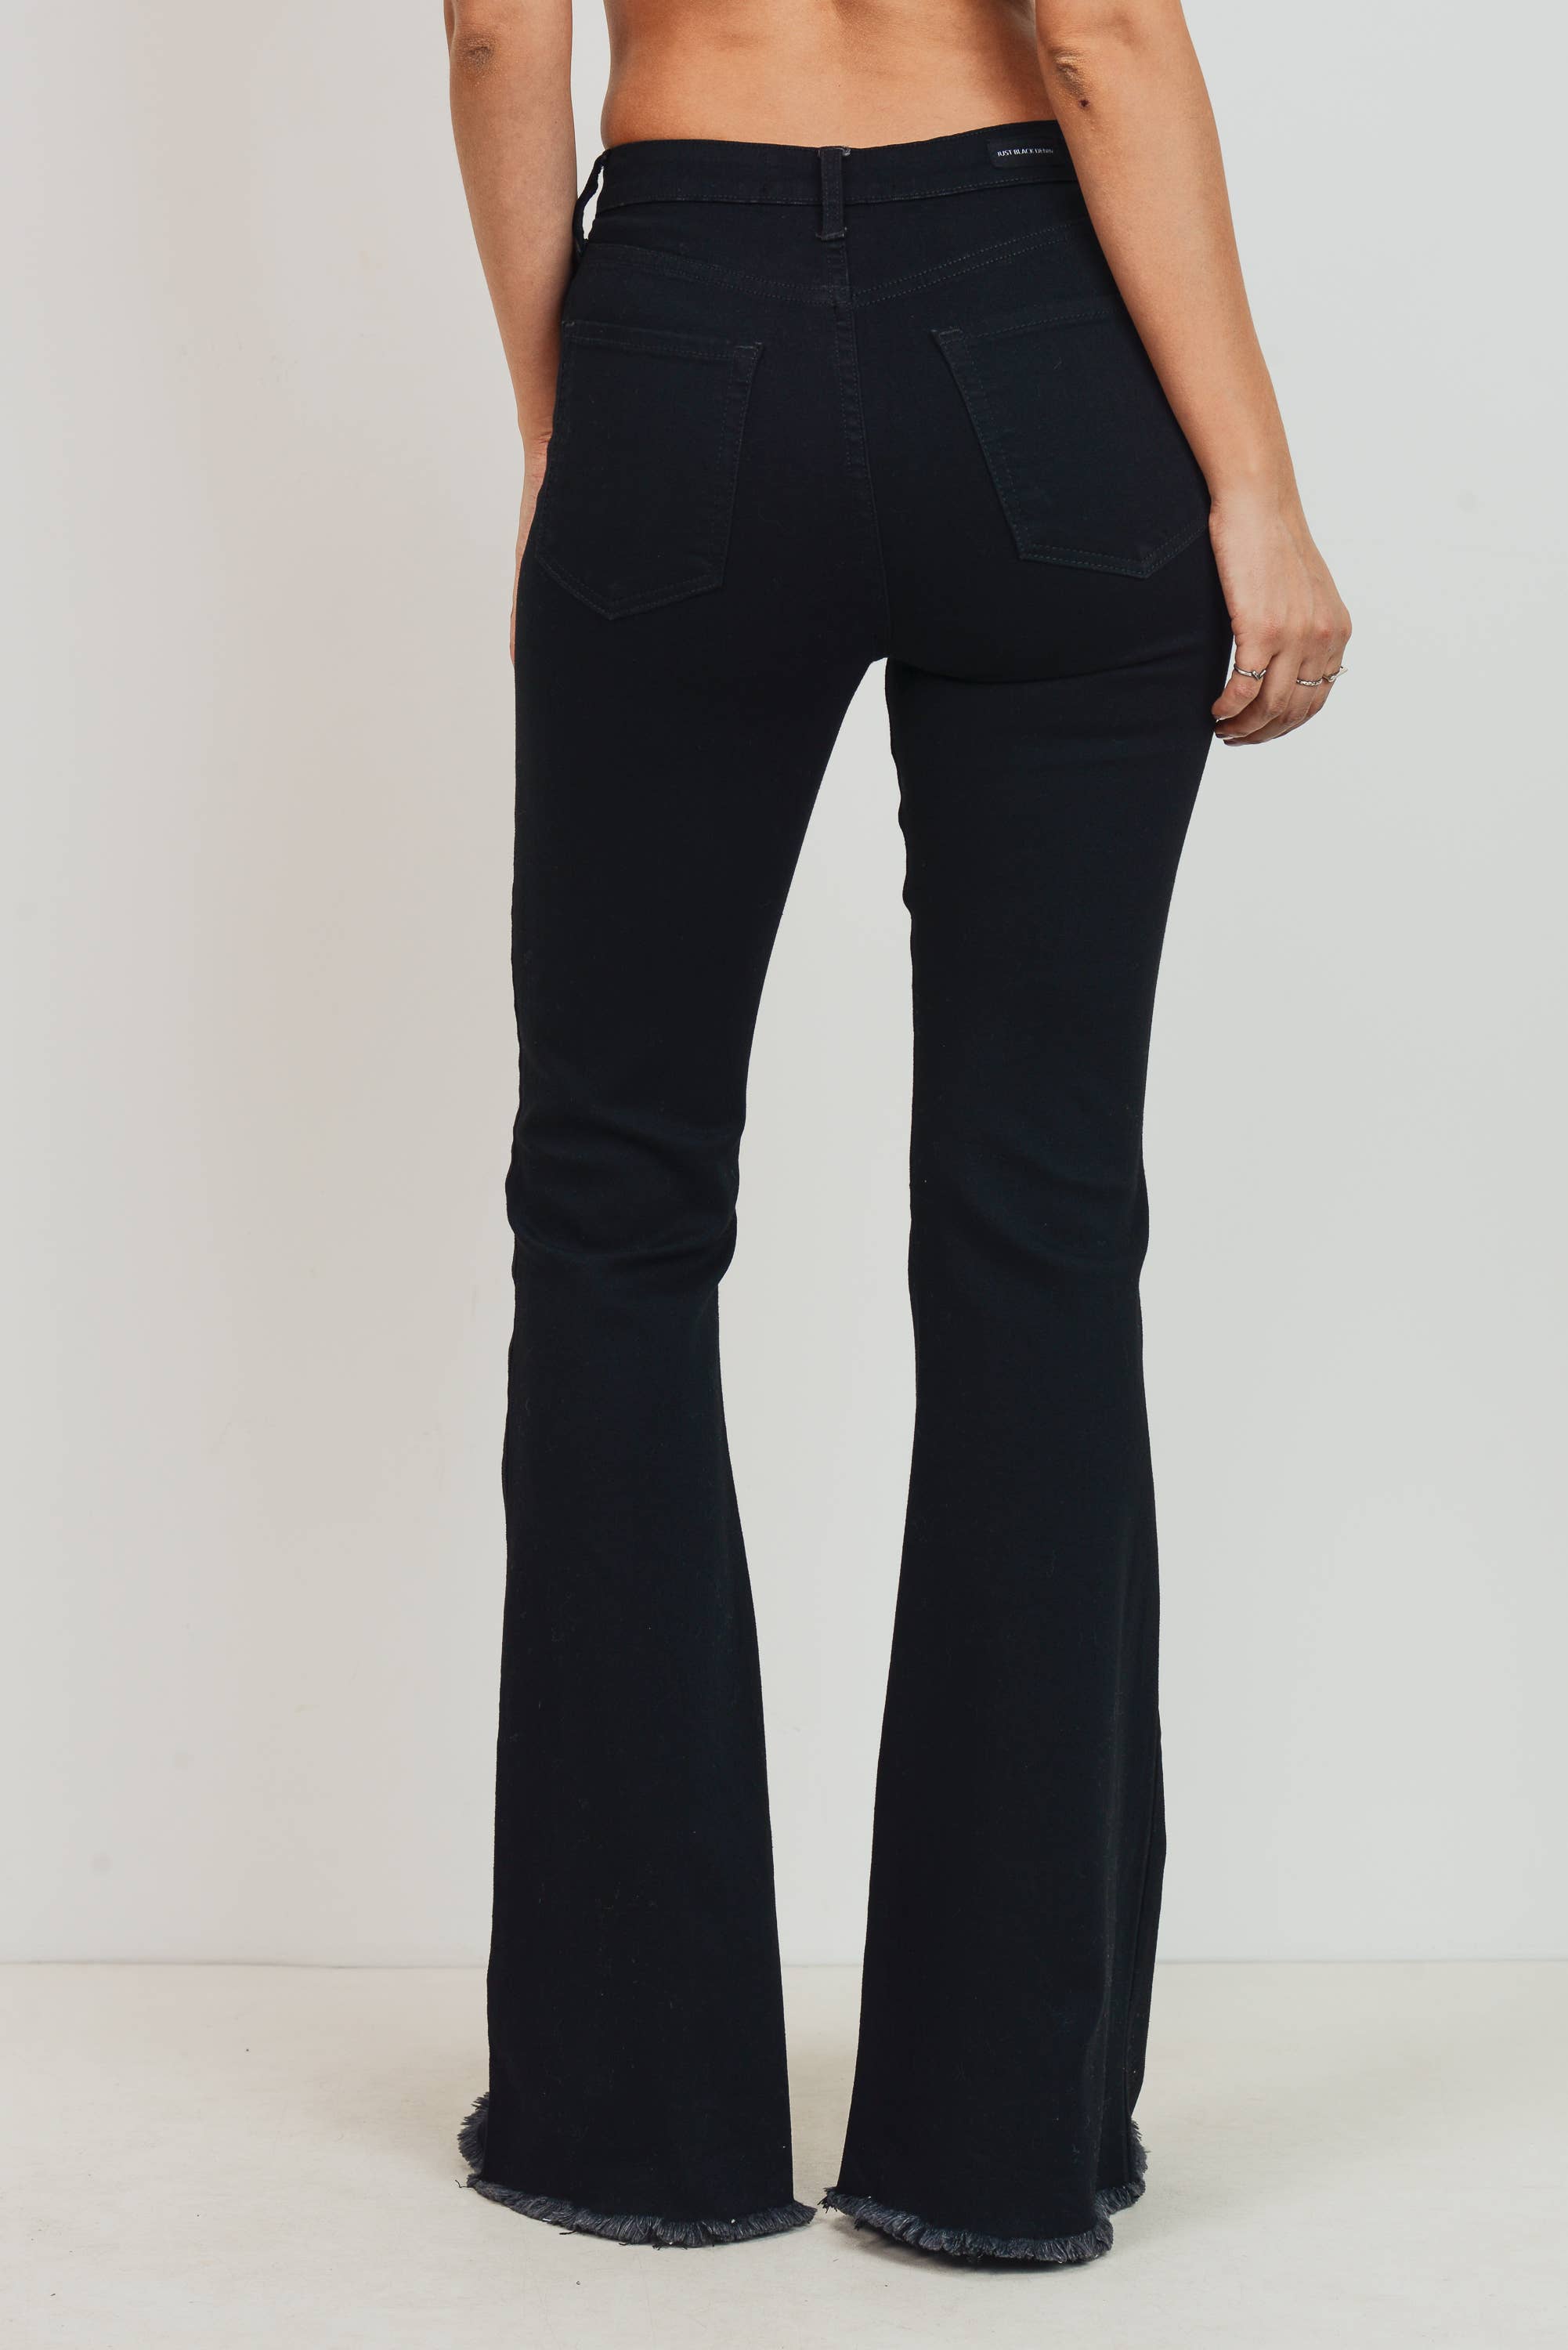 The Classic High Rise Bell Bottom Jeans By Just Black Denim